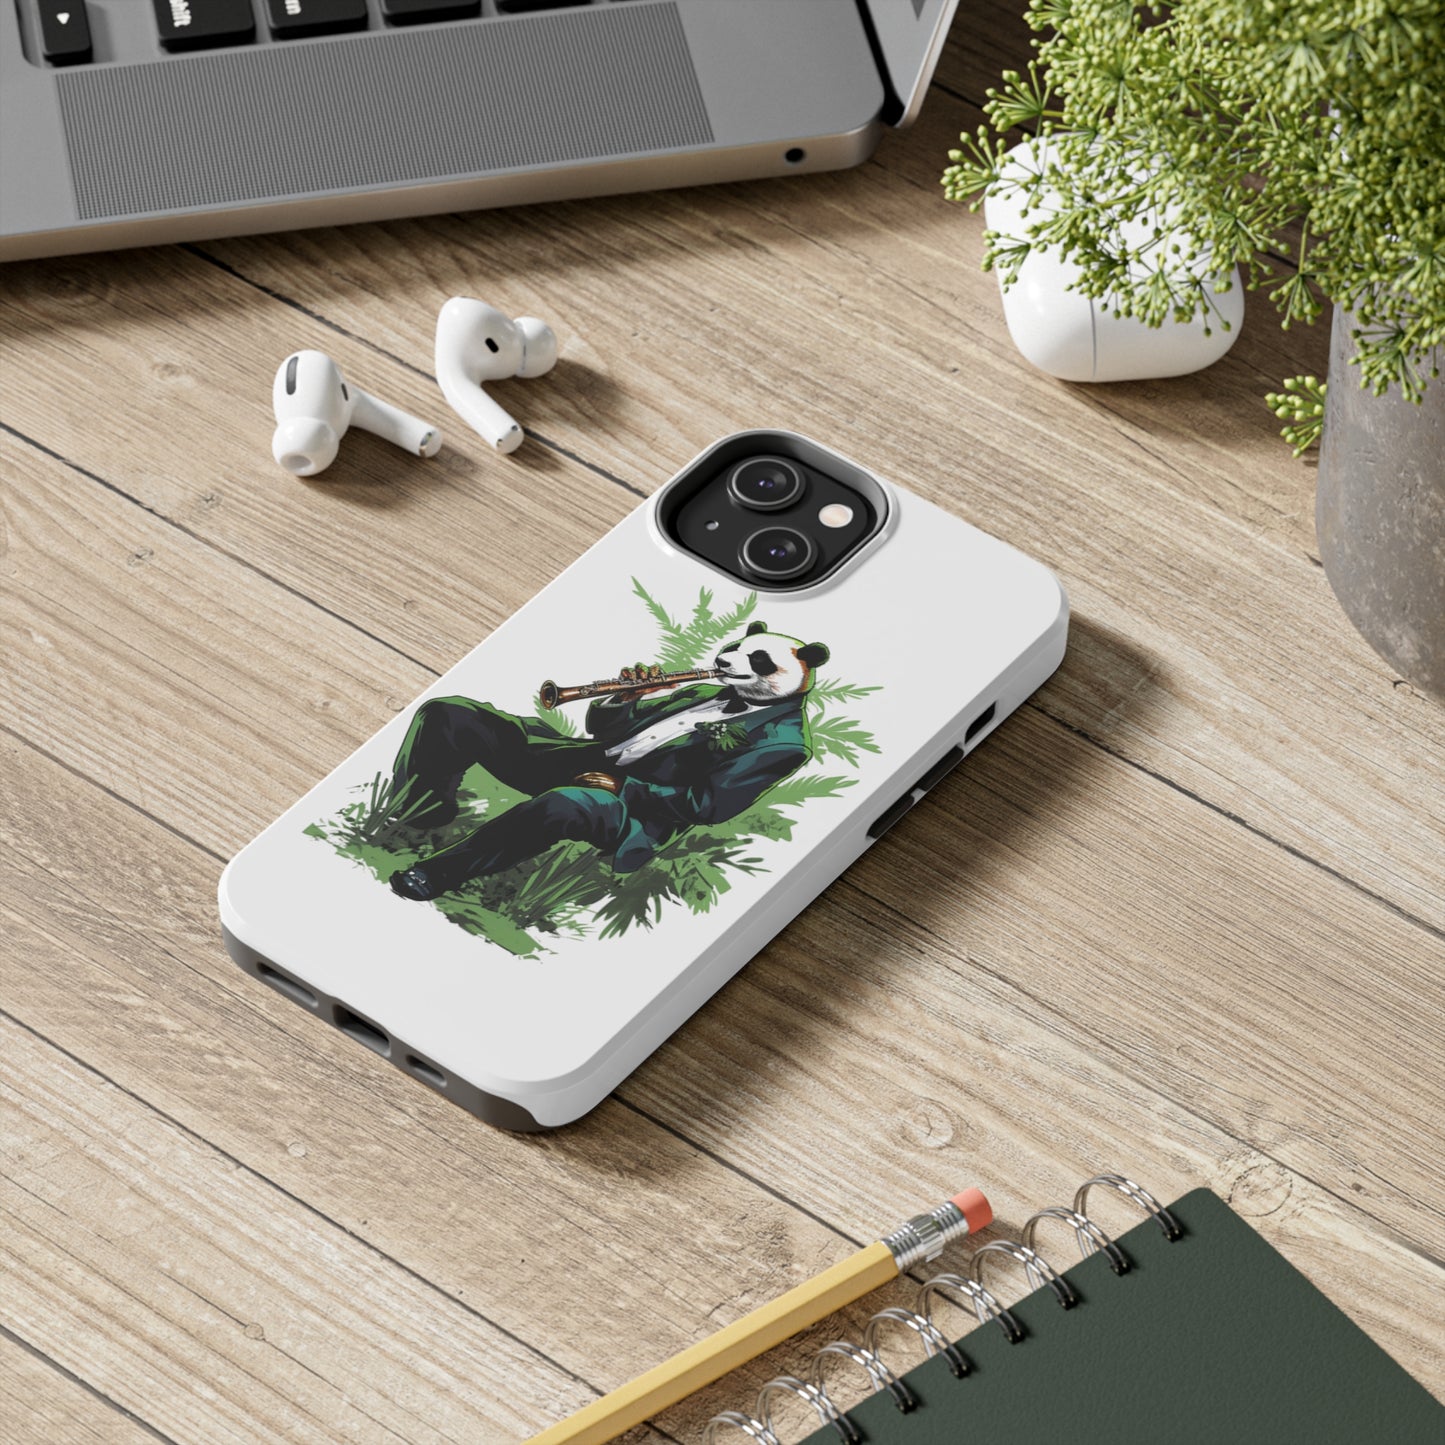 Tough Phone Cases with a suave comic panda playing a bamboo saxophone